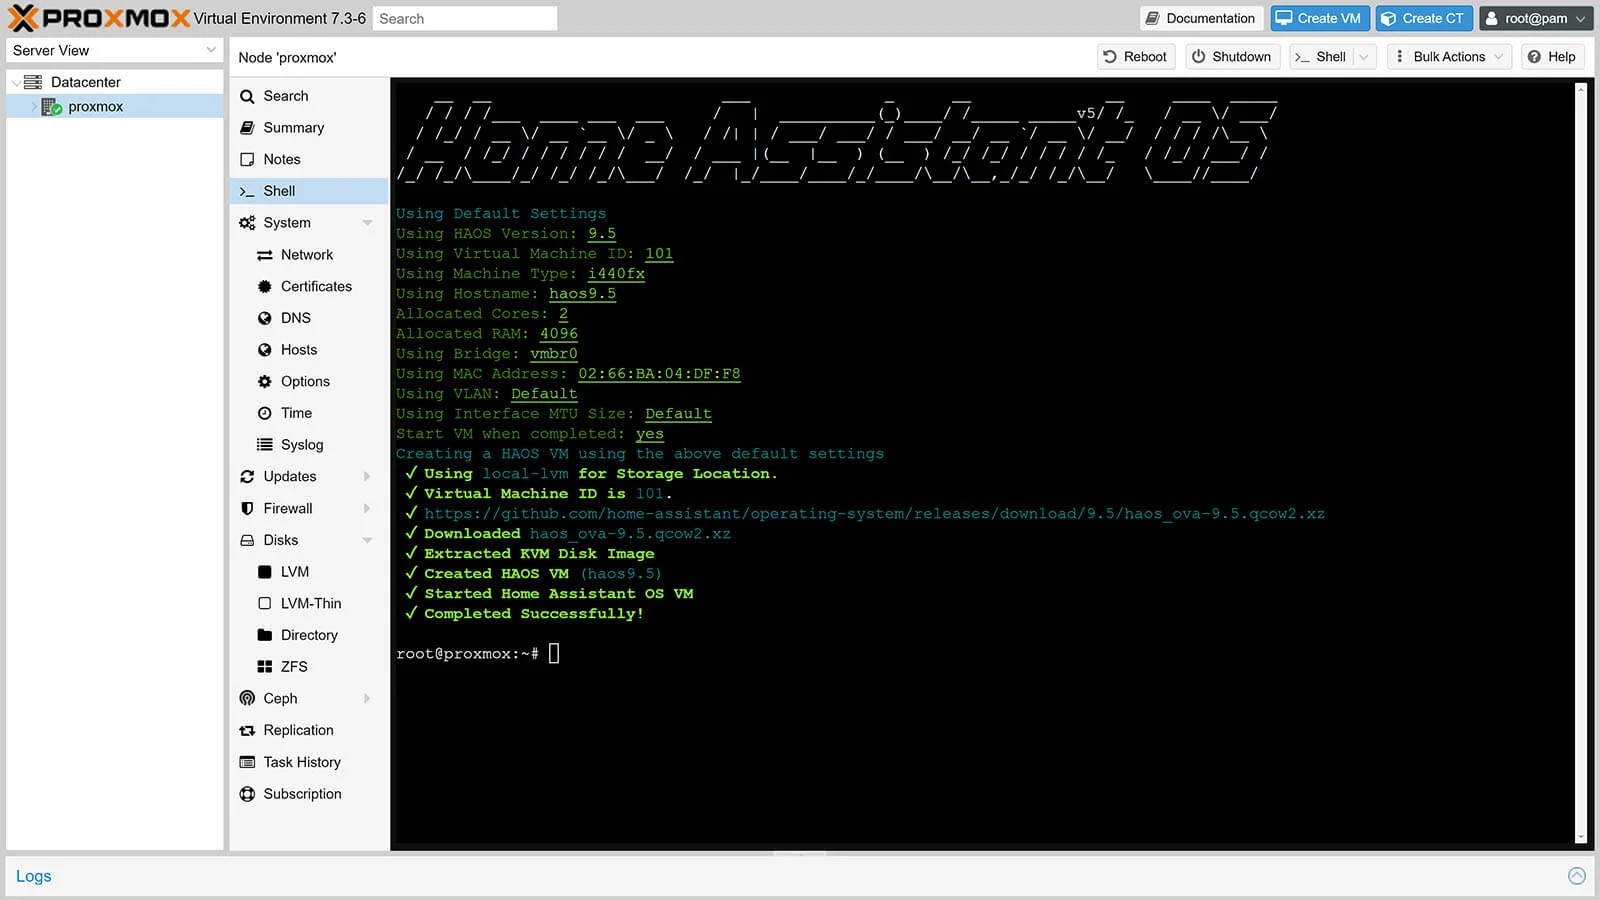 Home Assistant Desktop (macOS, Windows and Linux) - quick and easy access  to HA - Share your Projects! - Home Assistant Community